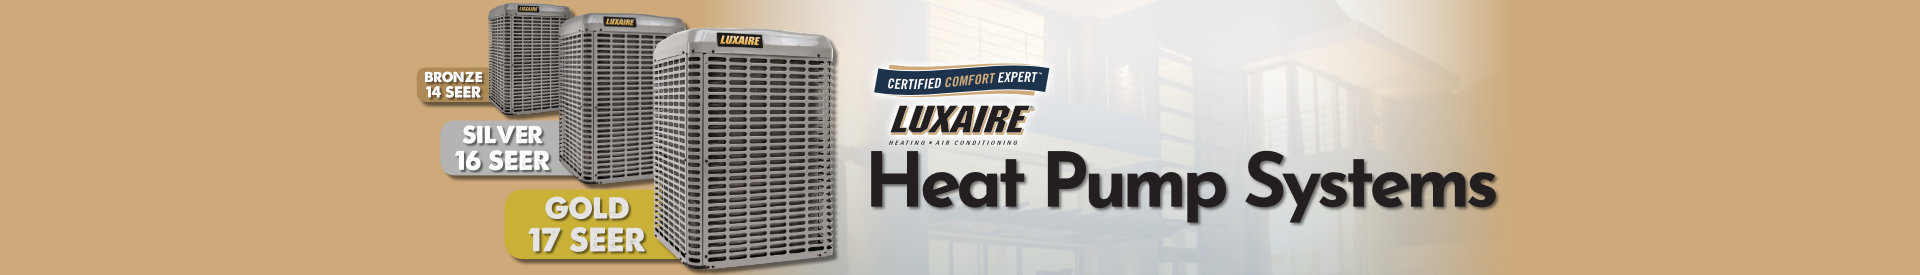 Luxaire Heat Pump Systems Banner